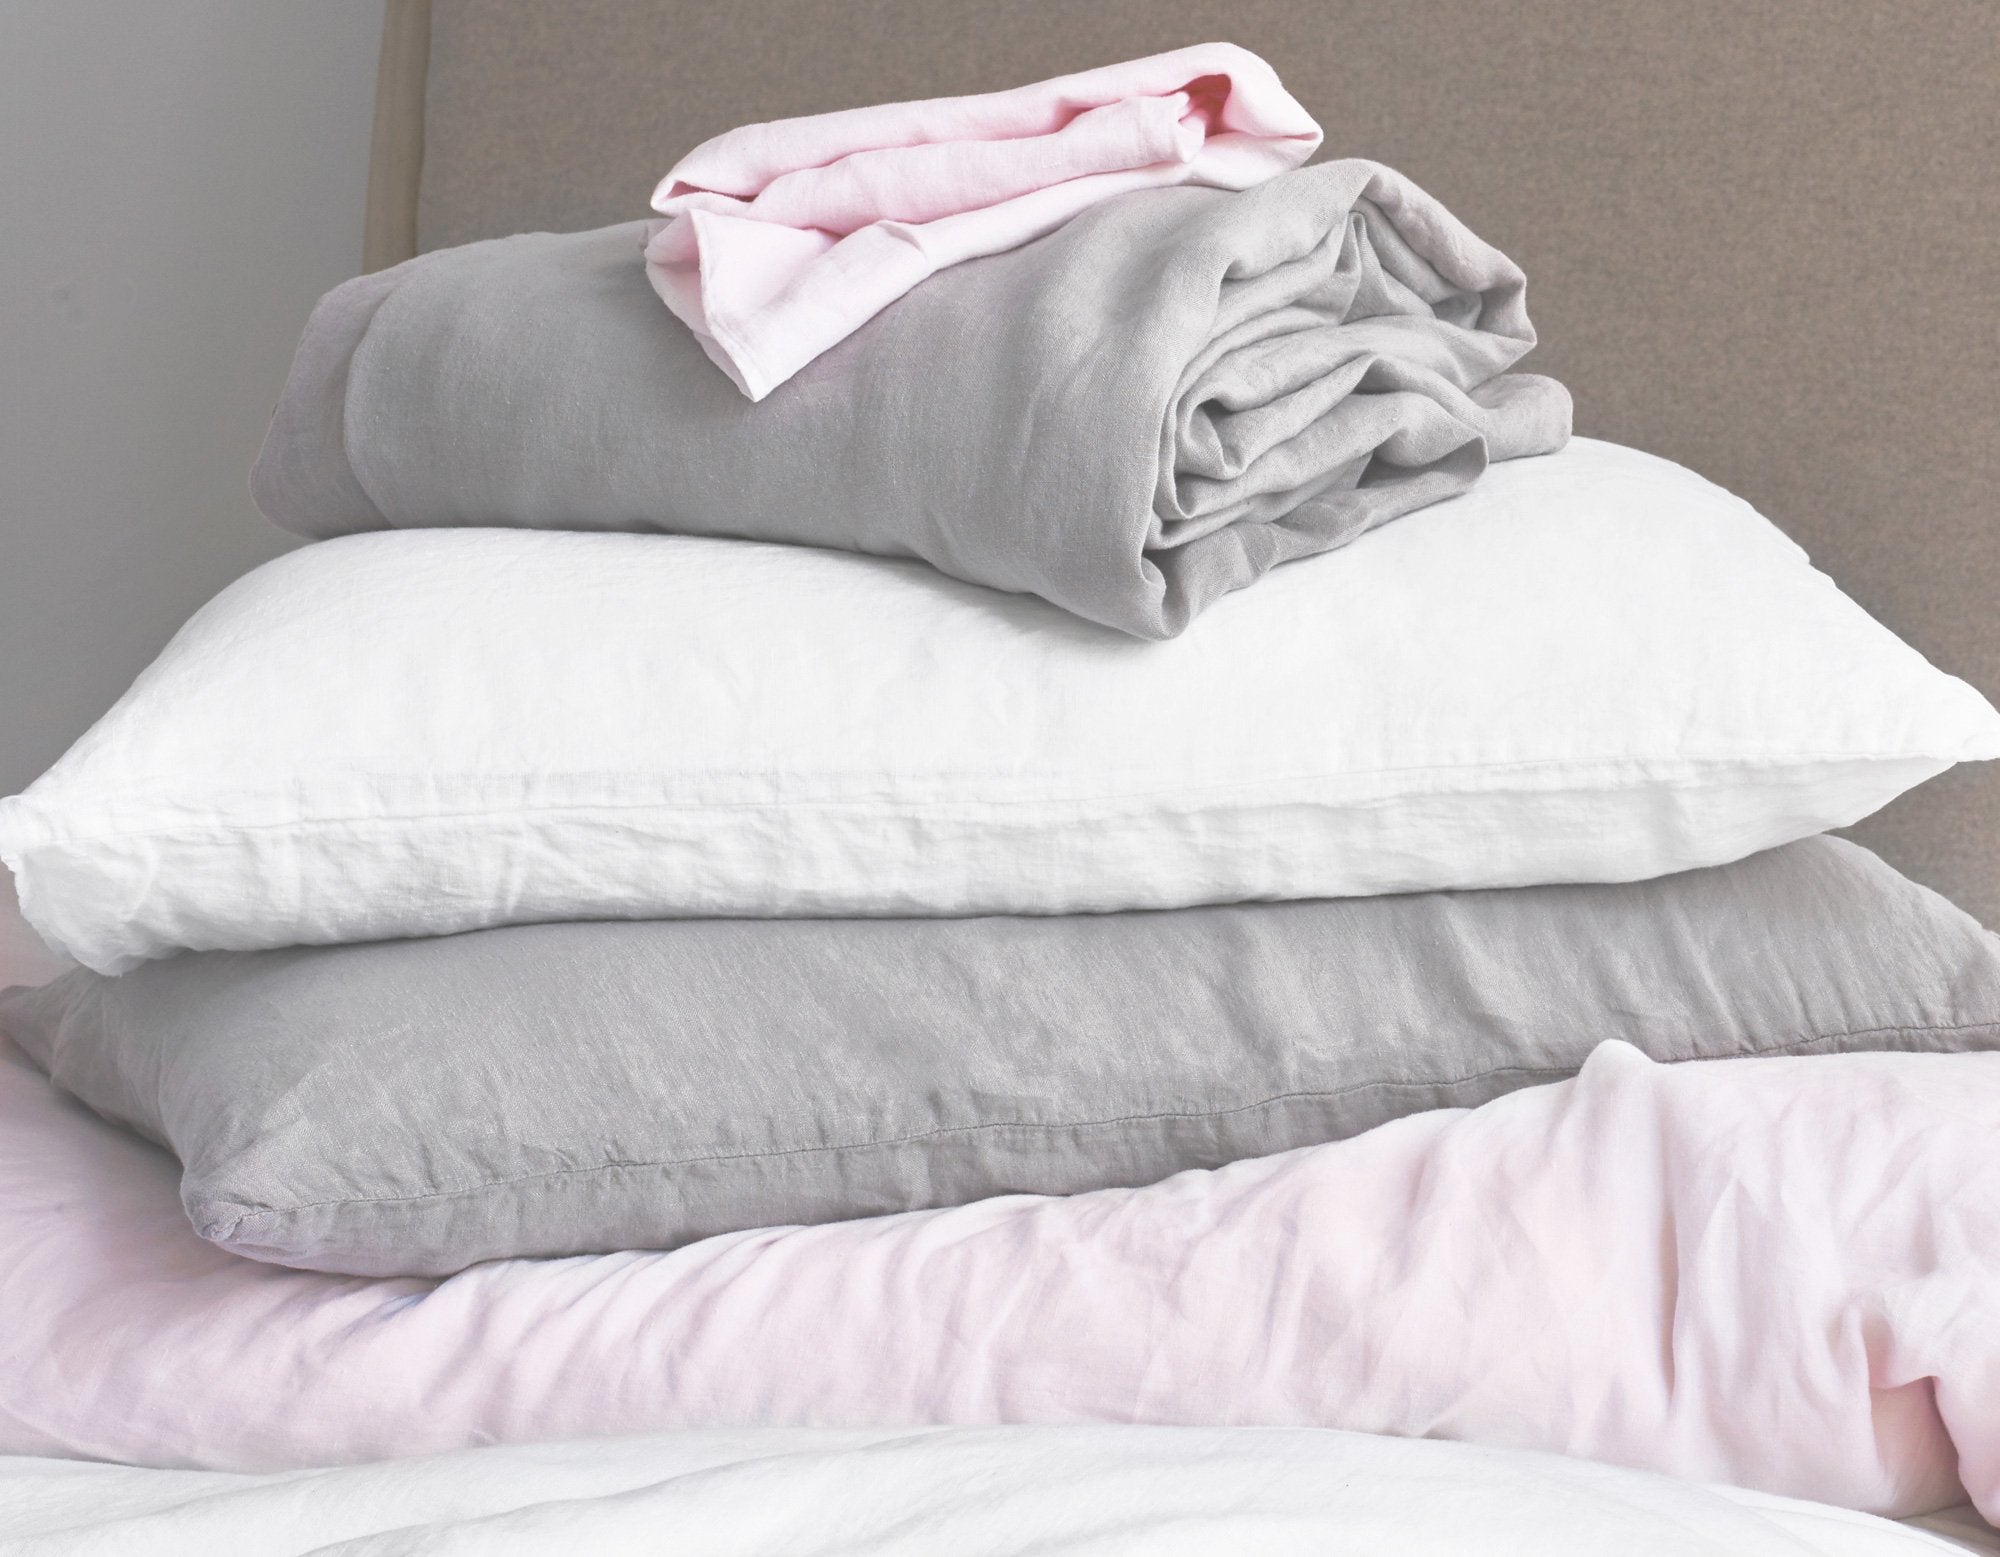 Linen Bedding in Grey, Pink, White | scooms